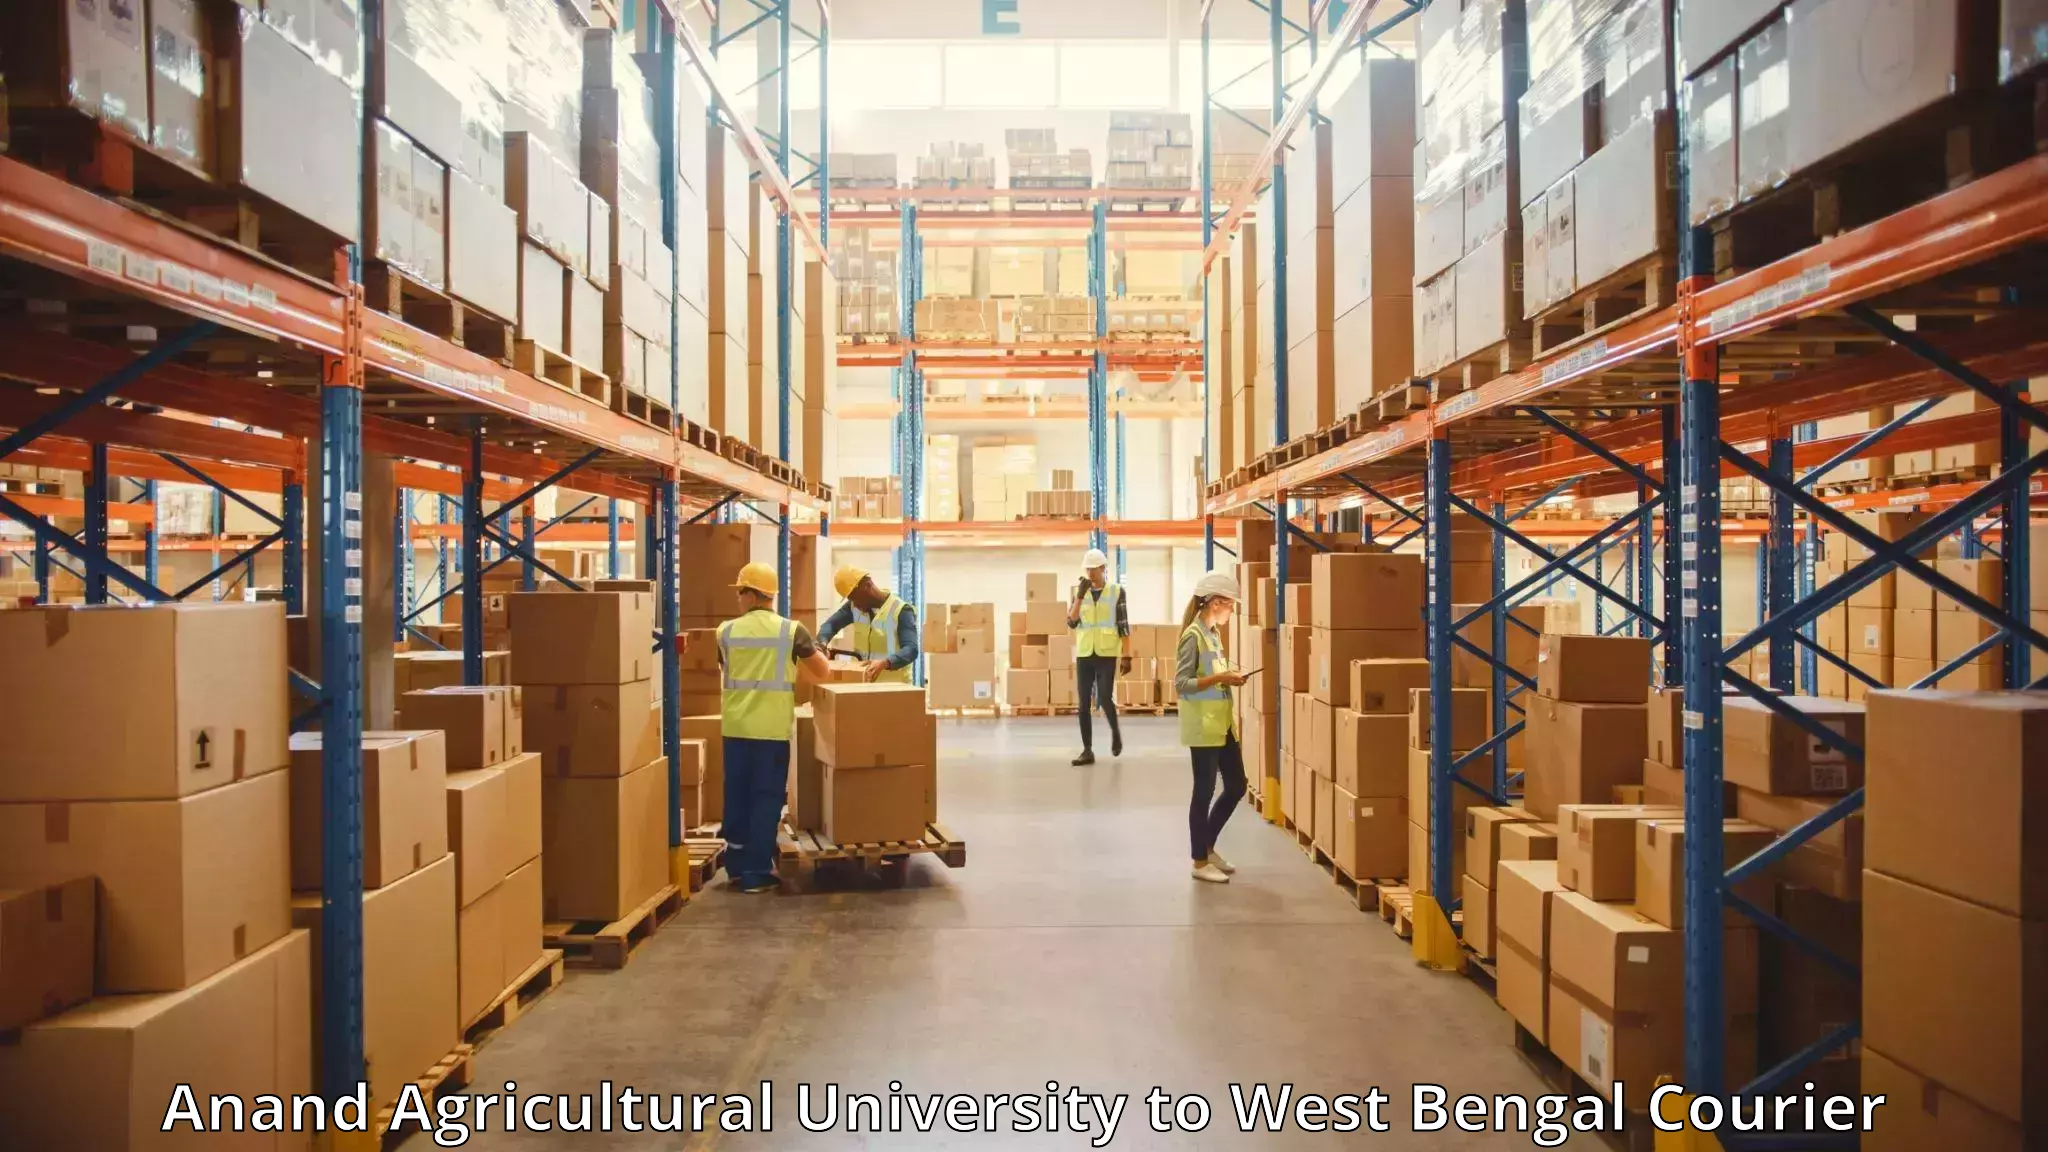 Baggage relocation service Anand Agricultural University to Helencha